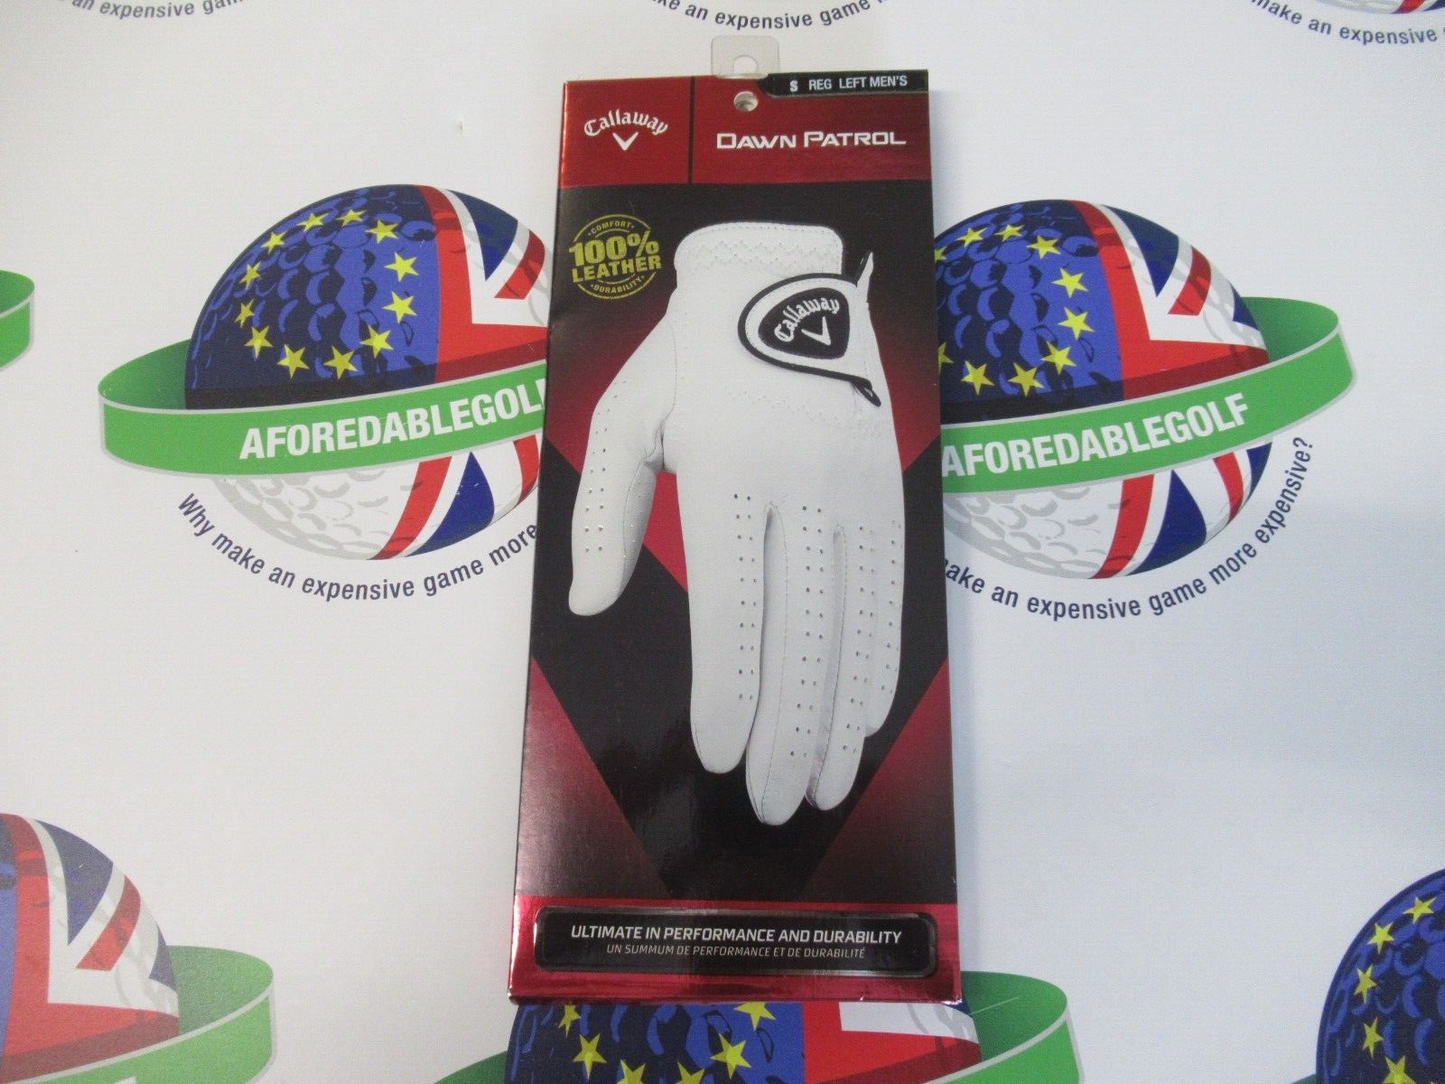 callaway dawn patrol leather left hand glove for right hand player size small